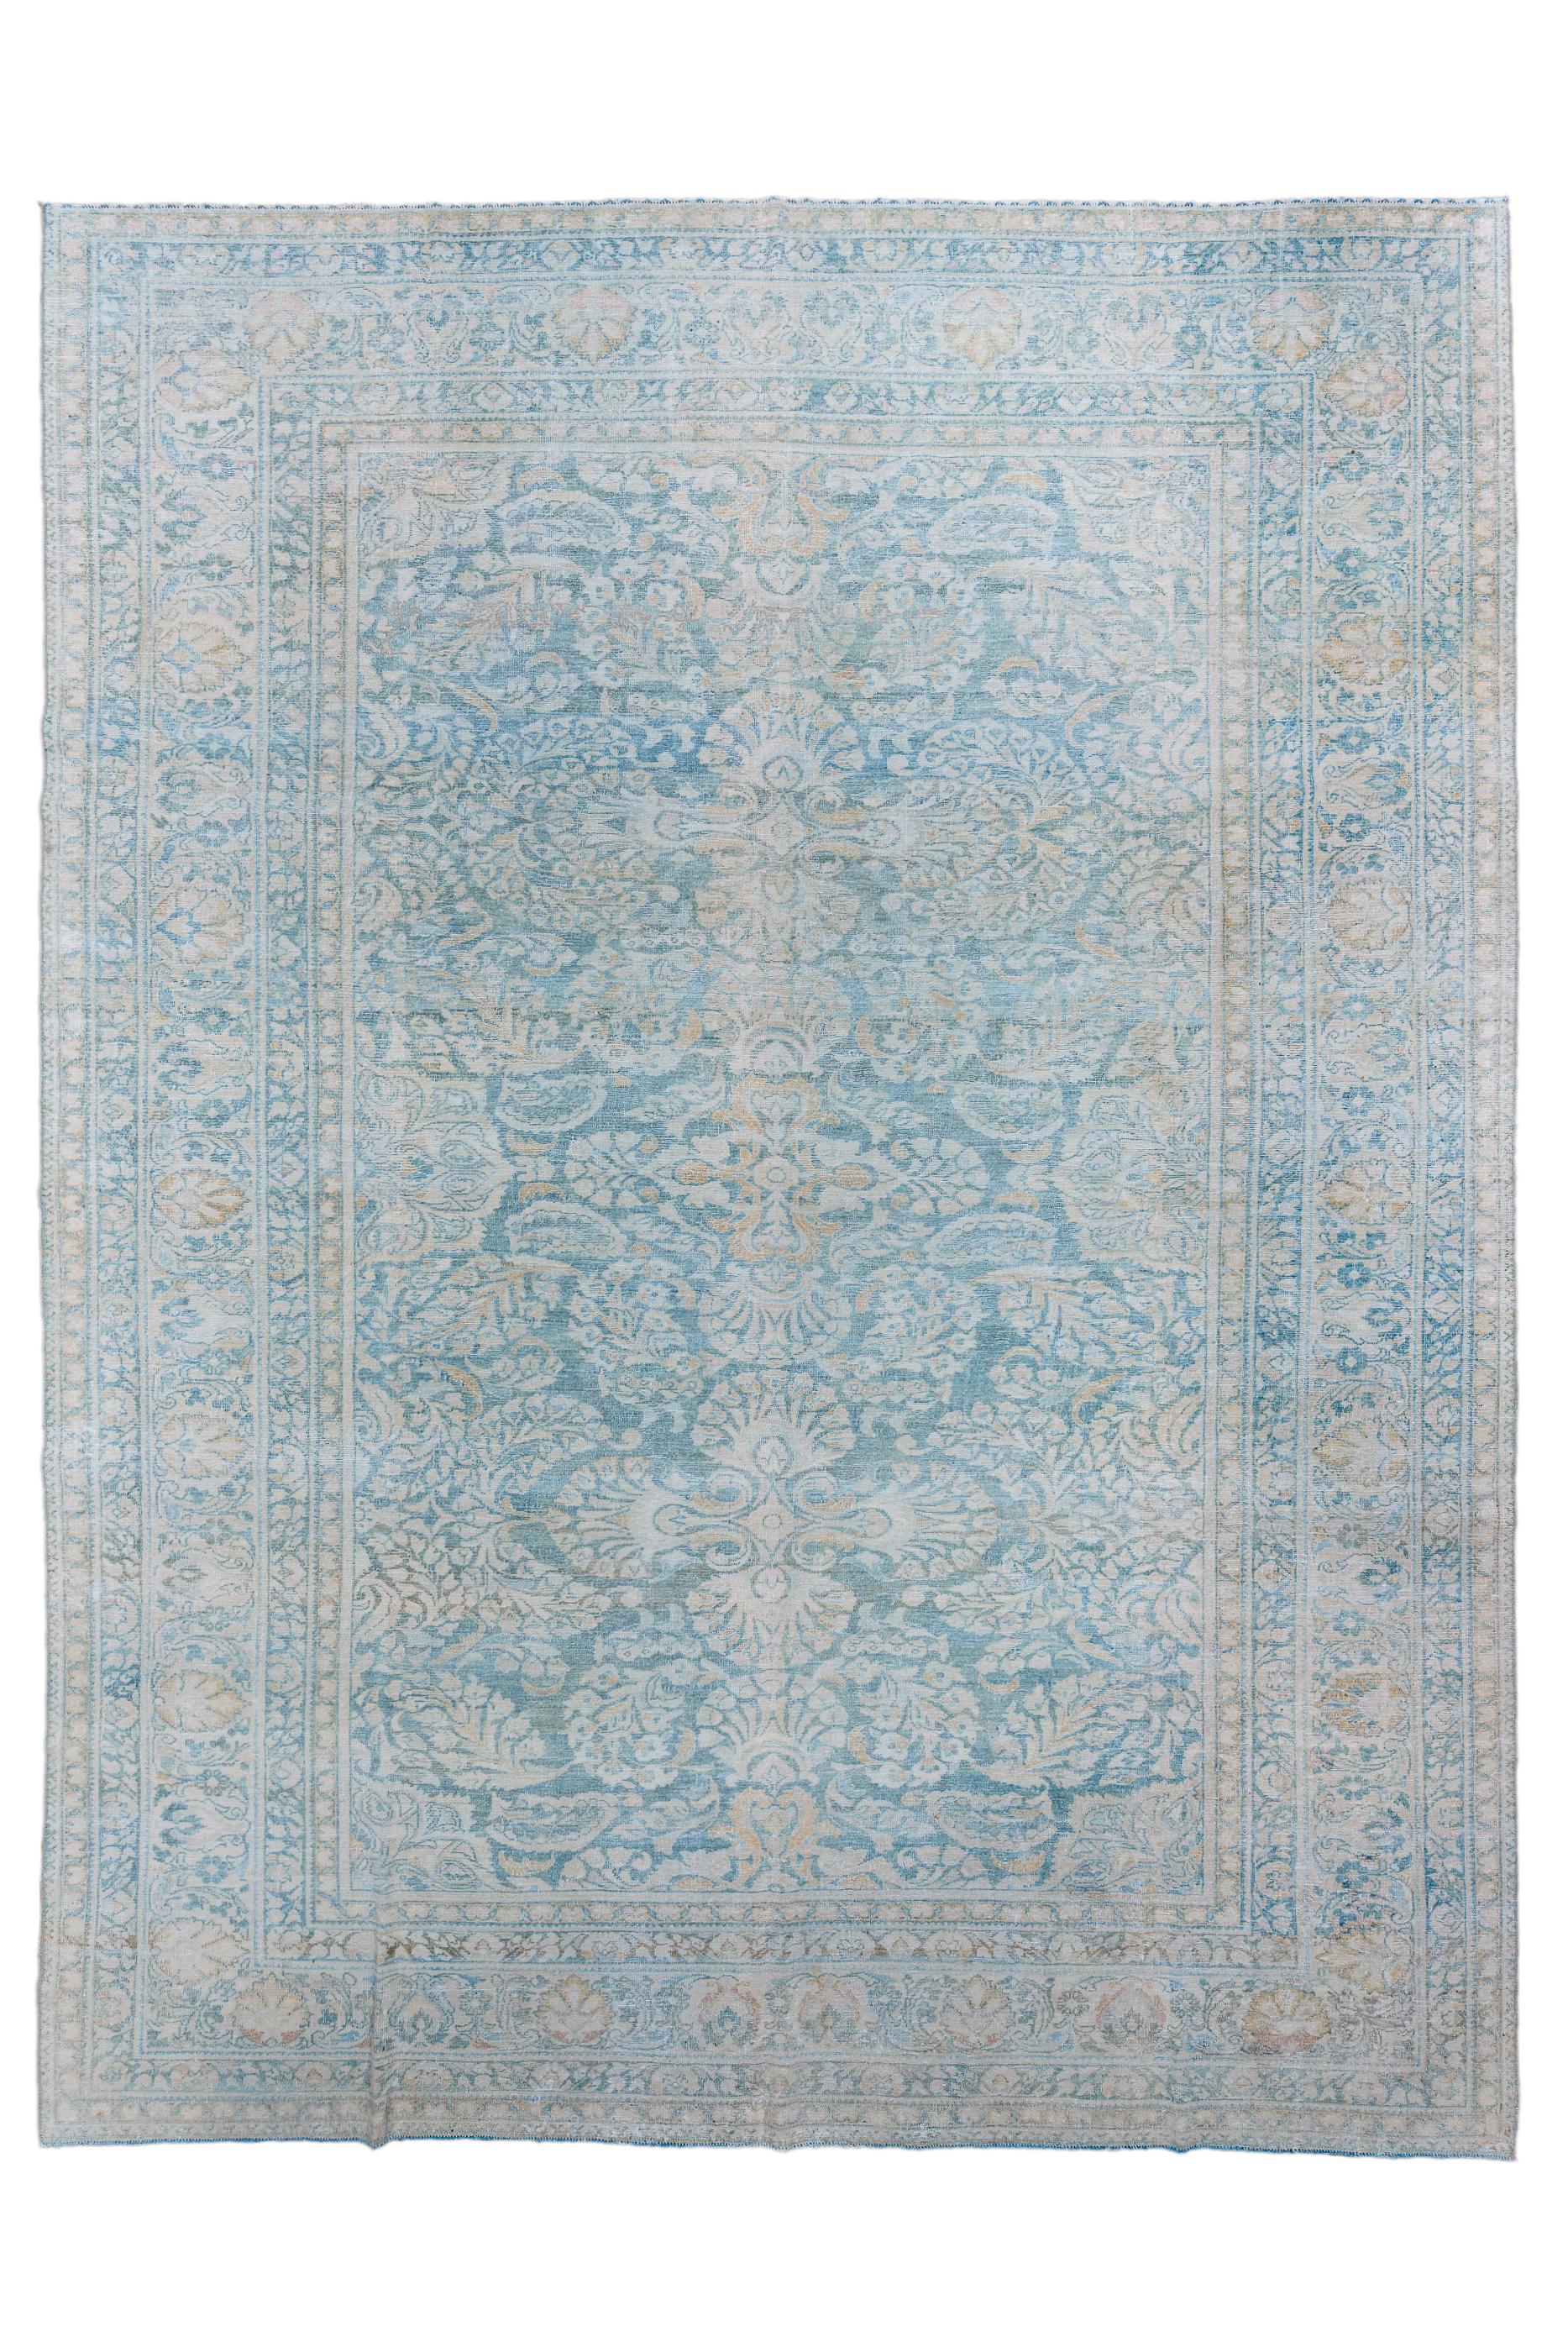 This village piece shows a clear influence of the “American Sarouk” style, with detached, complex curvilinear floral sprays on a dark blue field. Ecru main border with oval upright petal palmettes and spacer floral sprays. Medium weave on cotton.